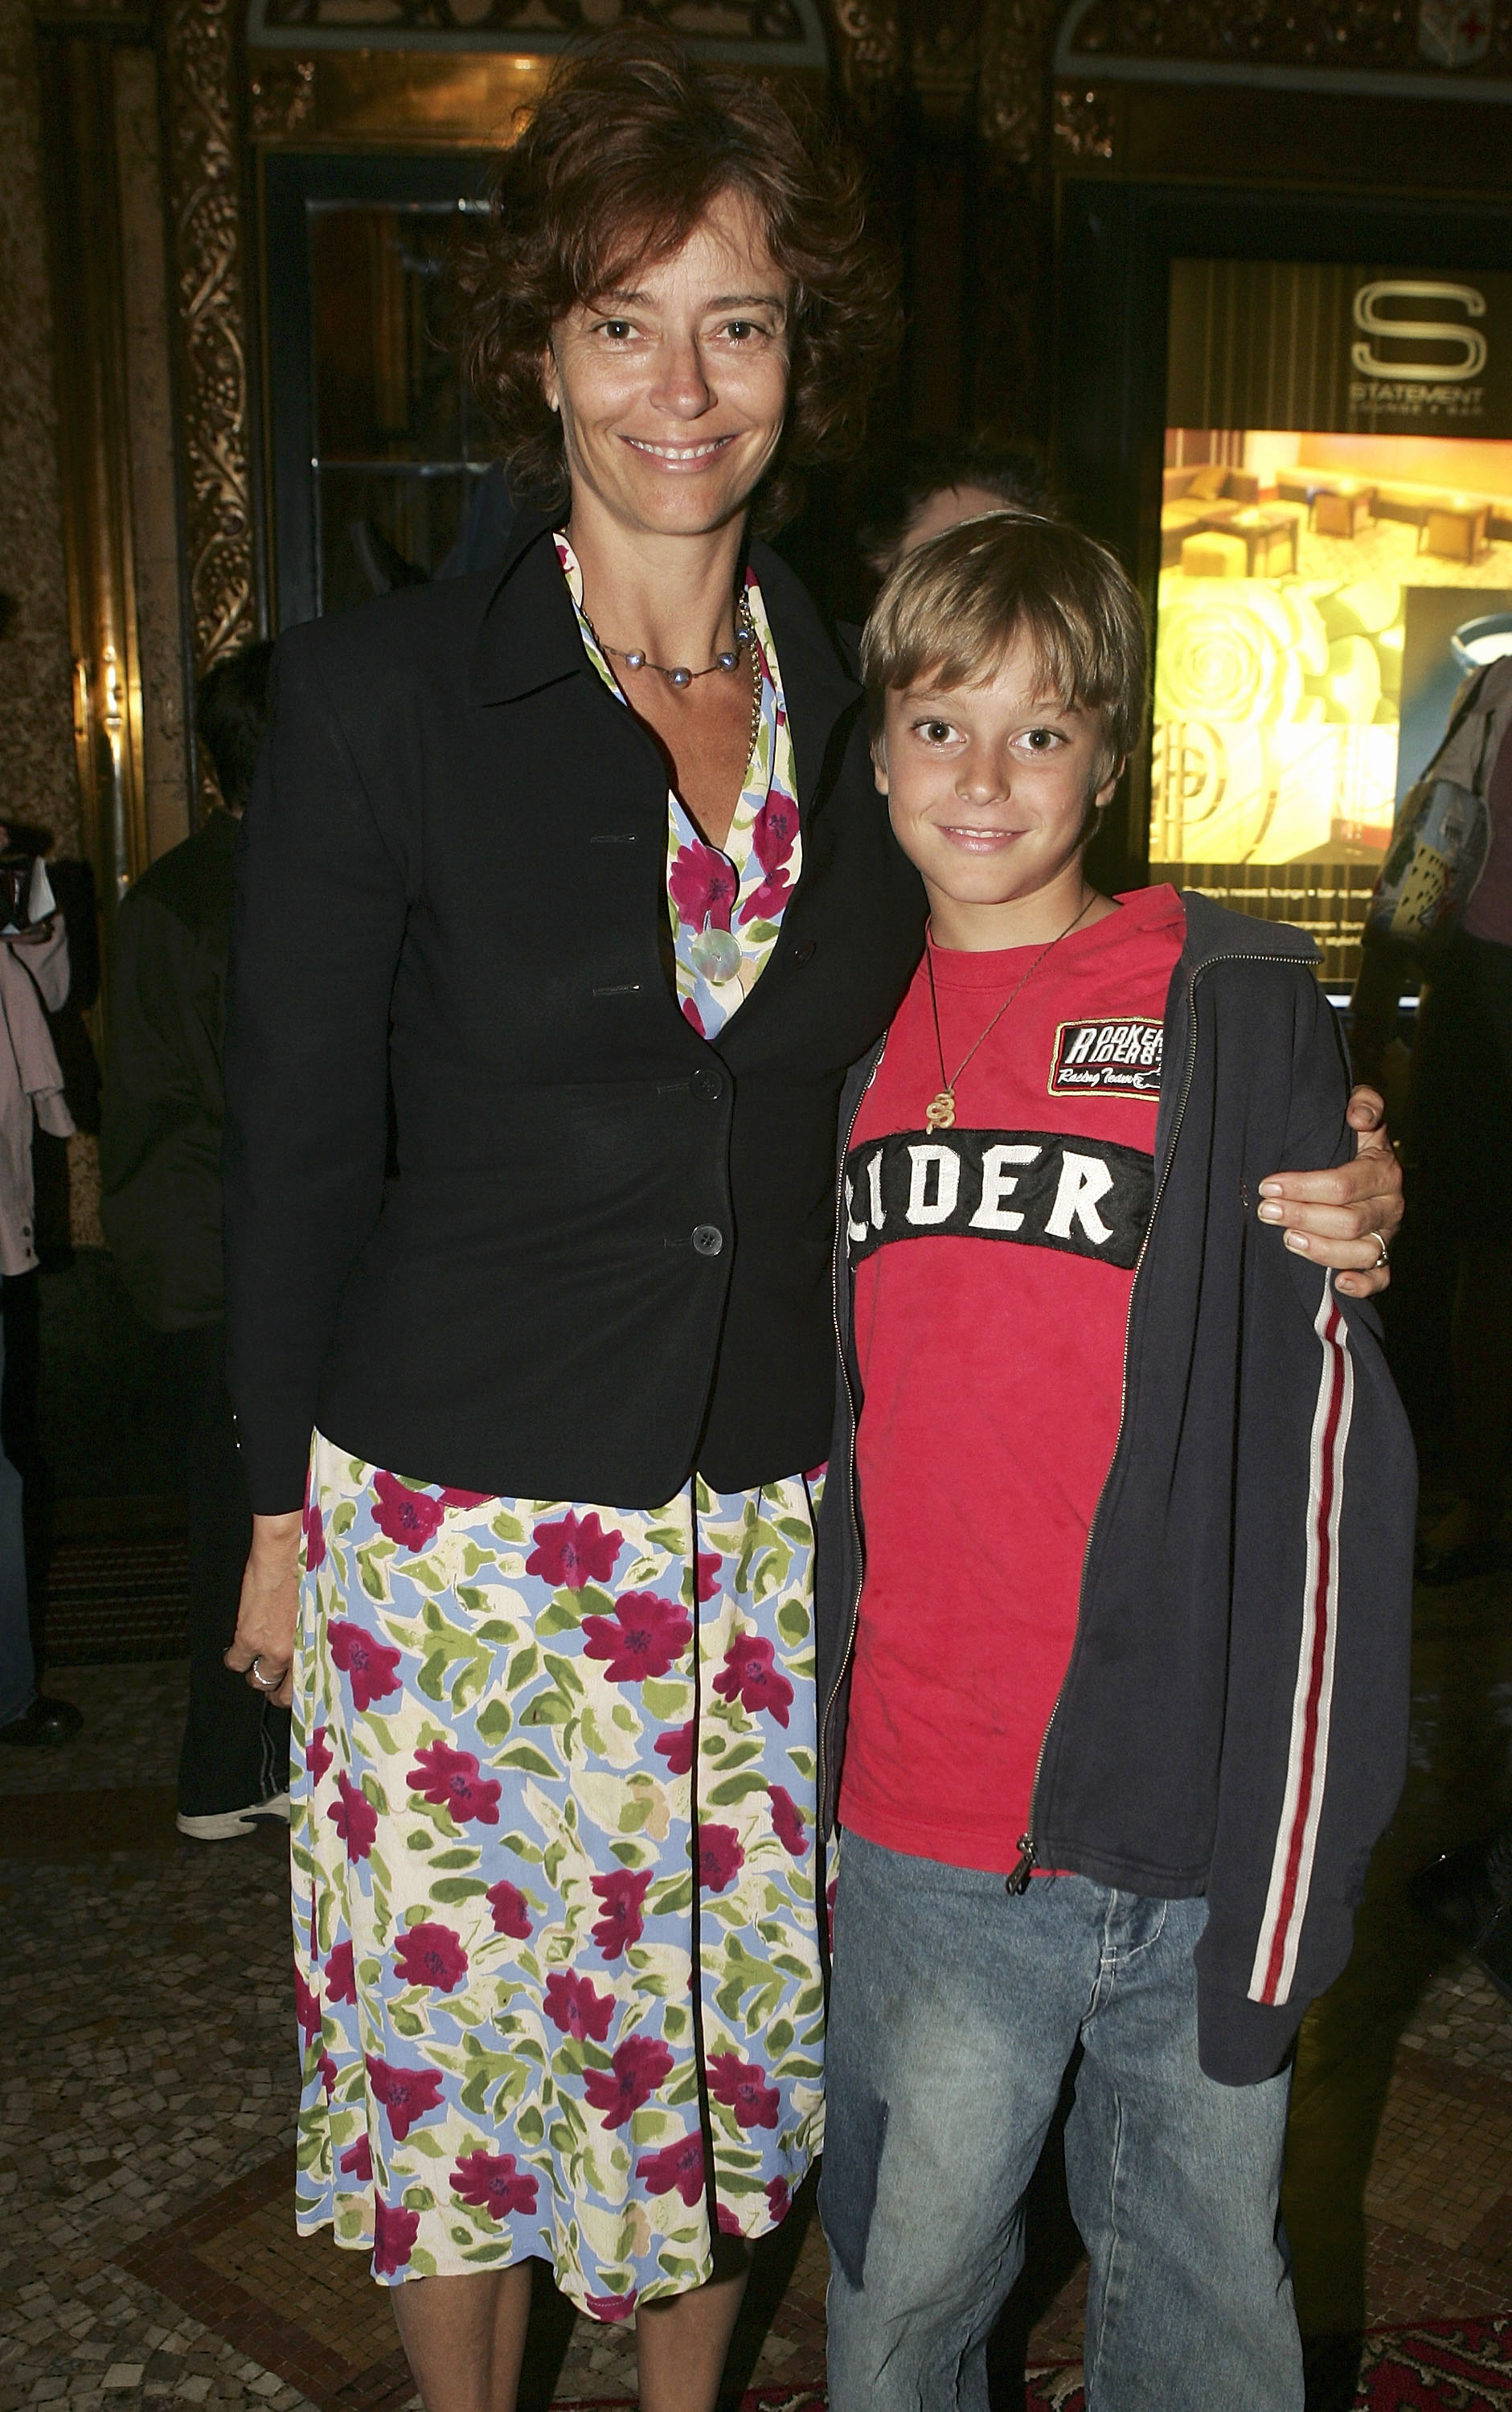 Rachel Ward and her son Joe Brown at Dein Perry's Tap Dogs "The Dogs Are Back" opening night in Sydney, Australia. April 27, 2005 | Source: Getty Images